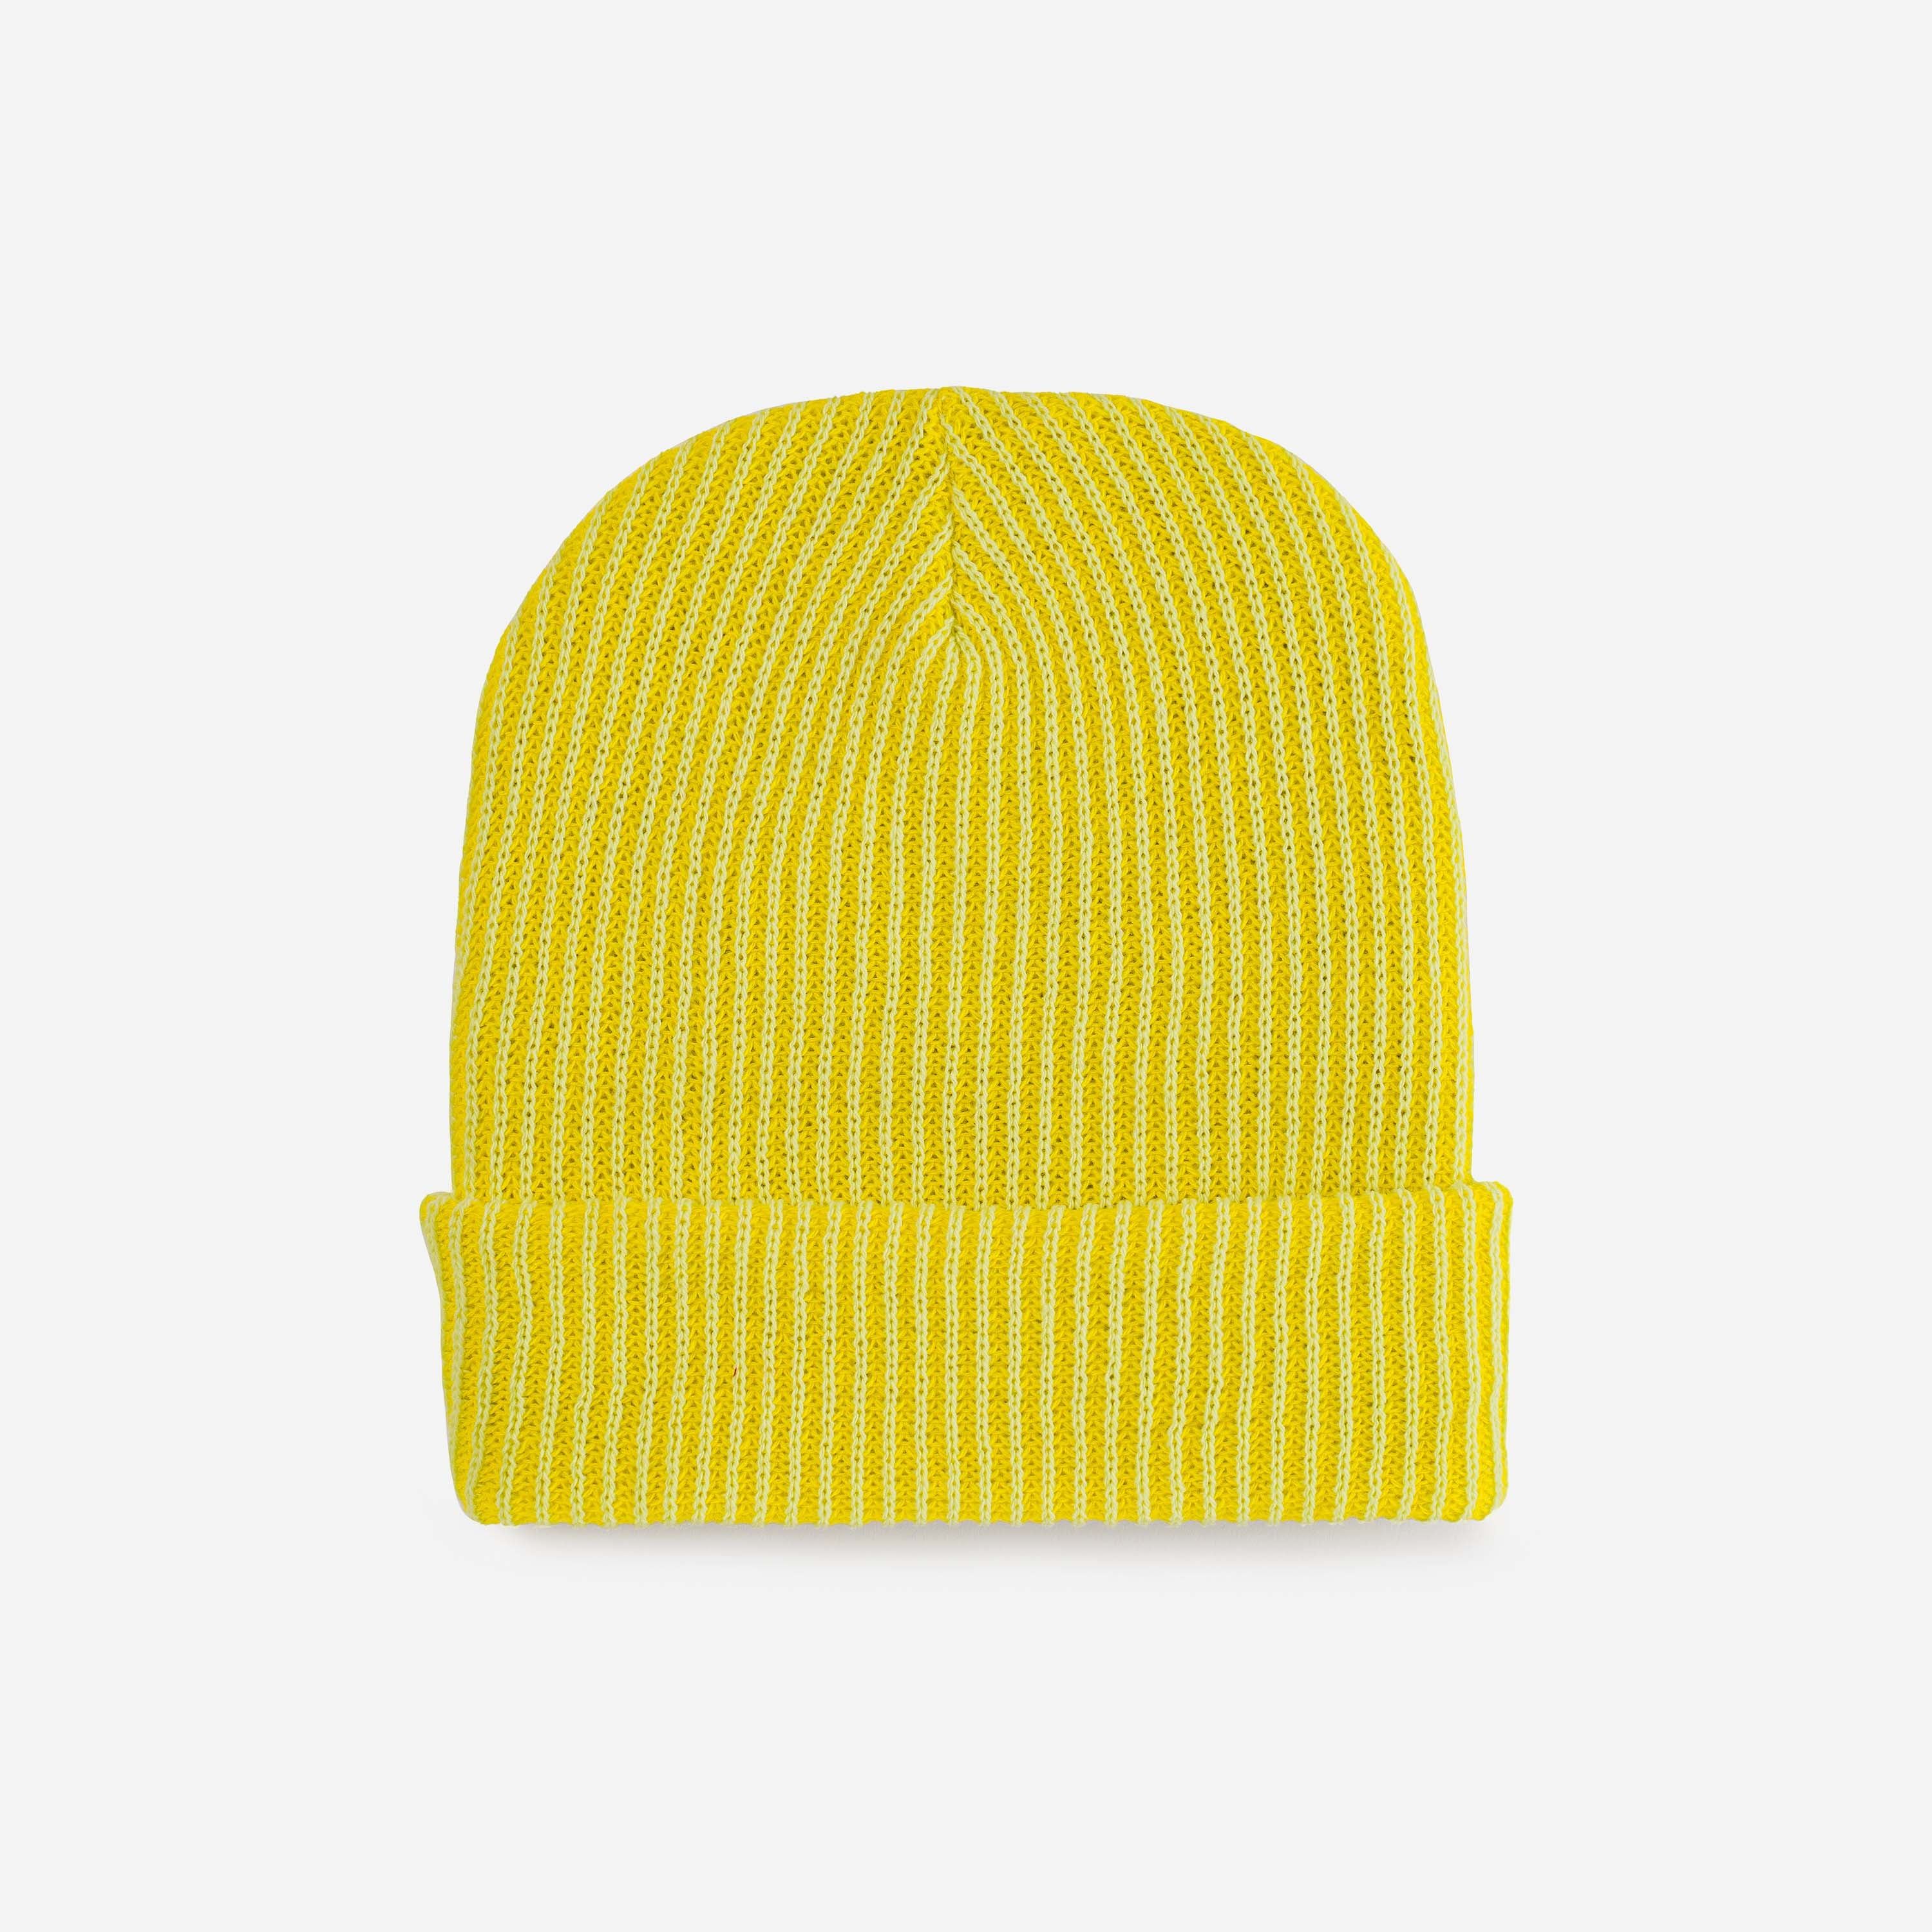 Simple Rib Hat - Knitted - Slouch Stripe Knit Mens Beanie - Green, Yellow, Blue – VERLOOP | knits